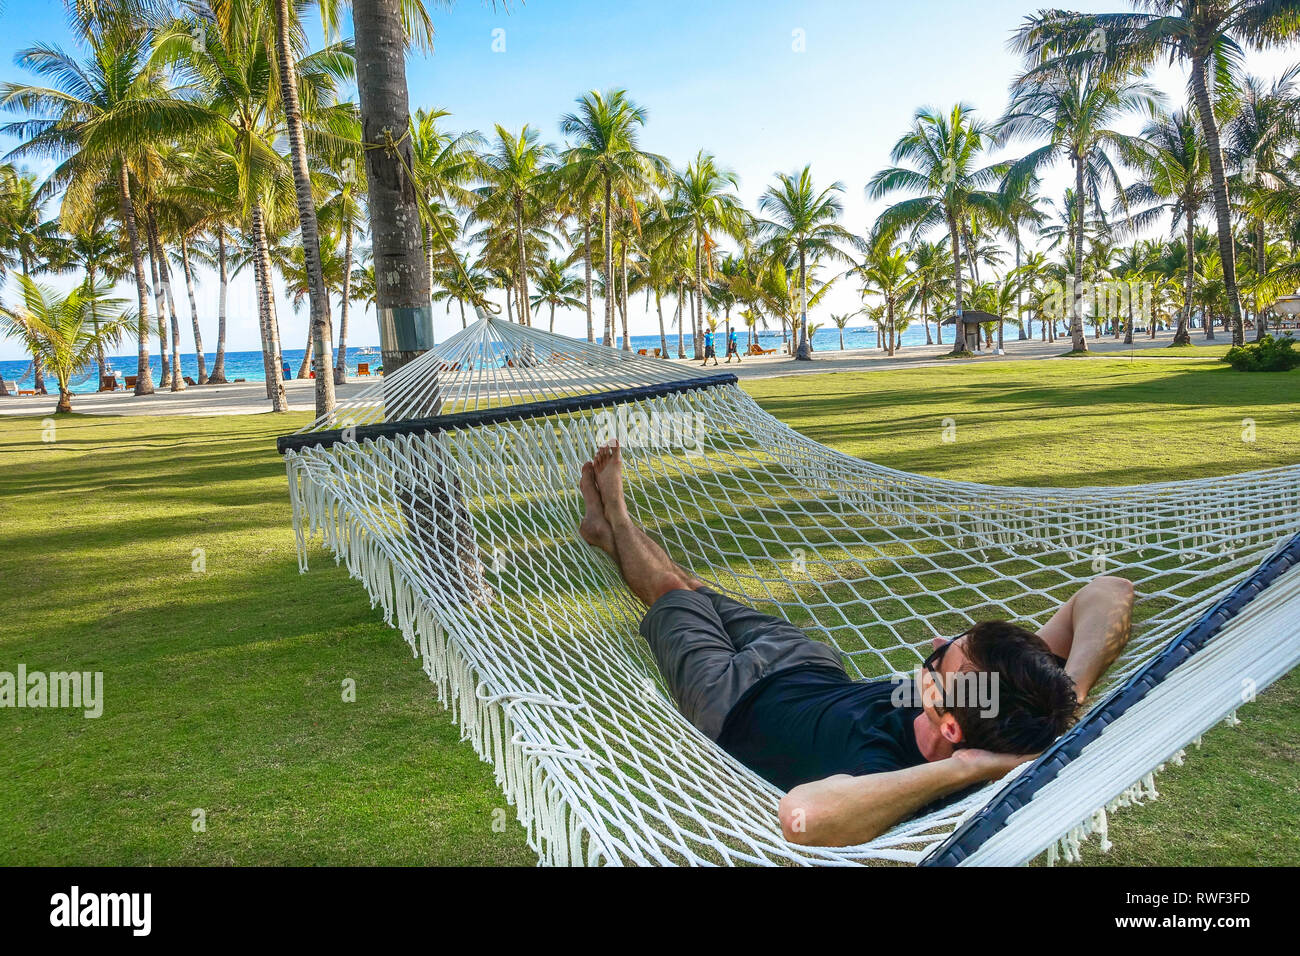 Tourist Man Relaxing in Large Rope Hammock, Panglao - Bohol, Philippines Stock Photo